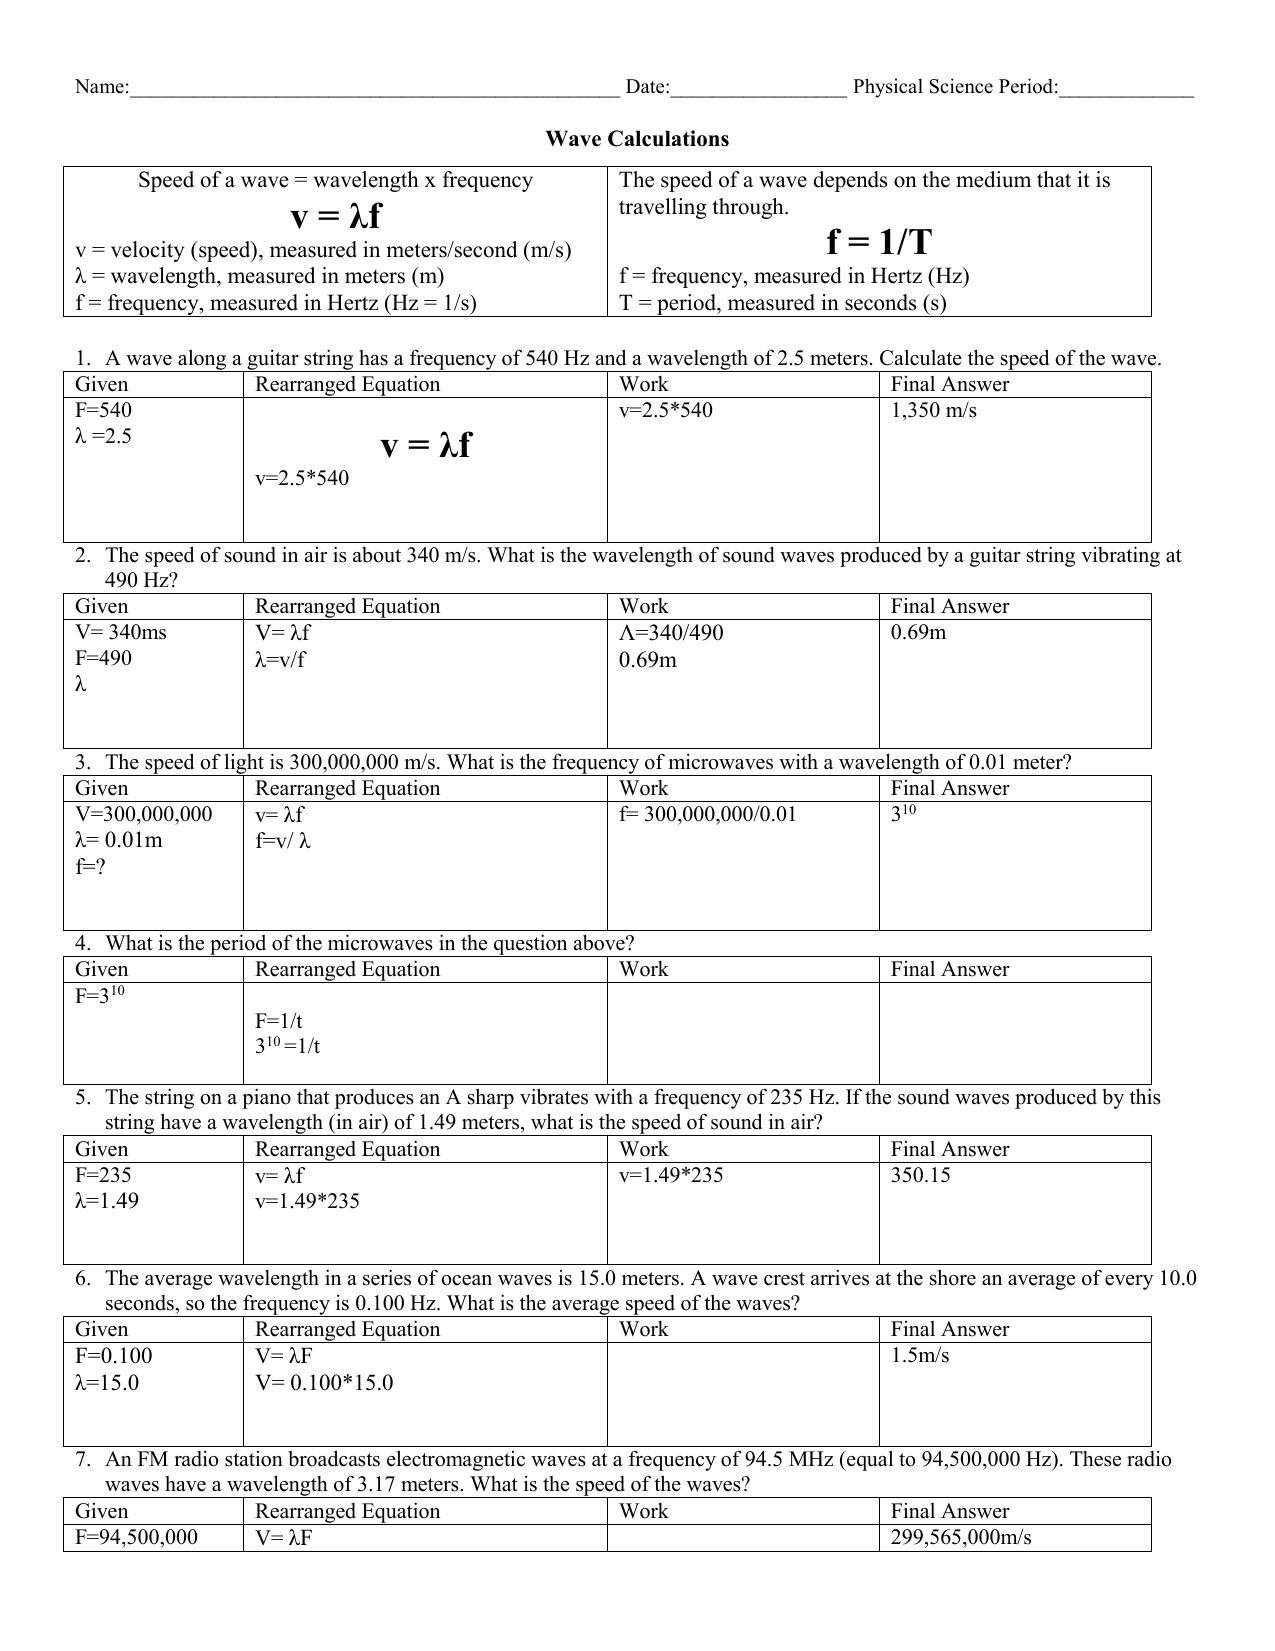 Wave Speed Equation Practice Problems Key Answers Speed Wavelength Frequency Worksheets